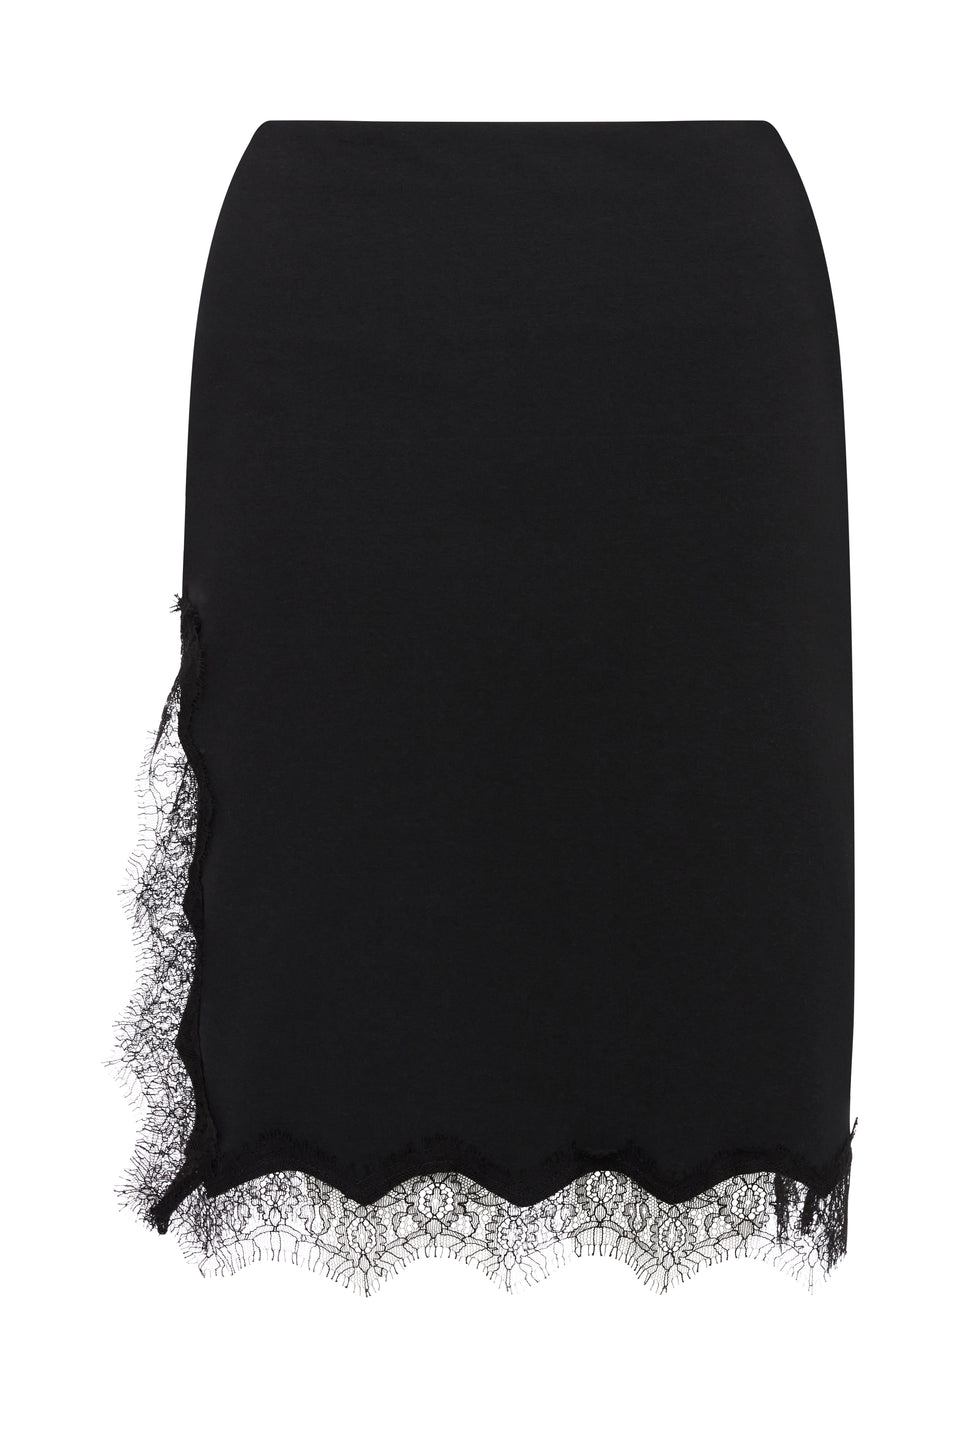 The Recycled Jersey Lace Pencil Skirt